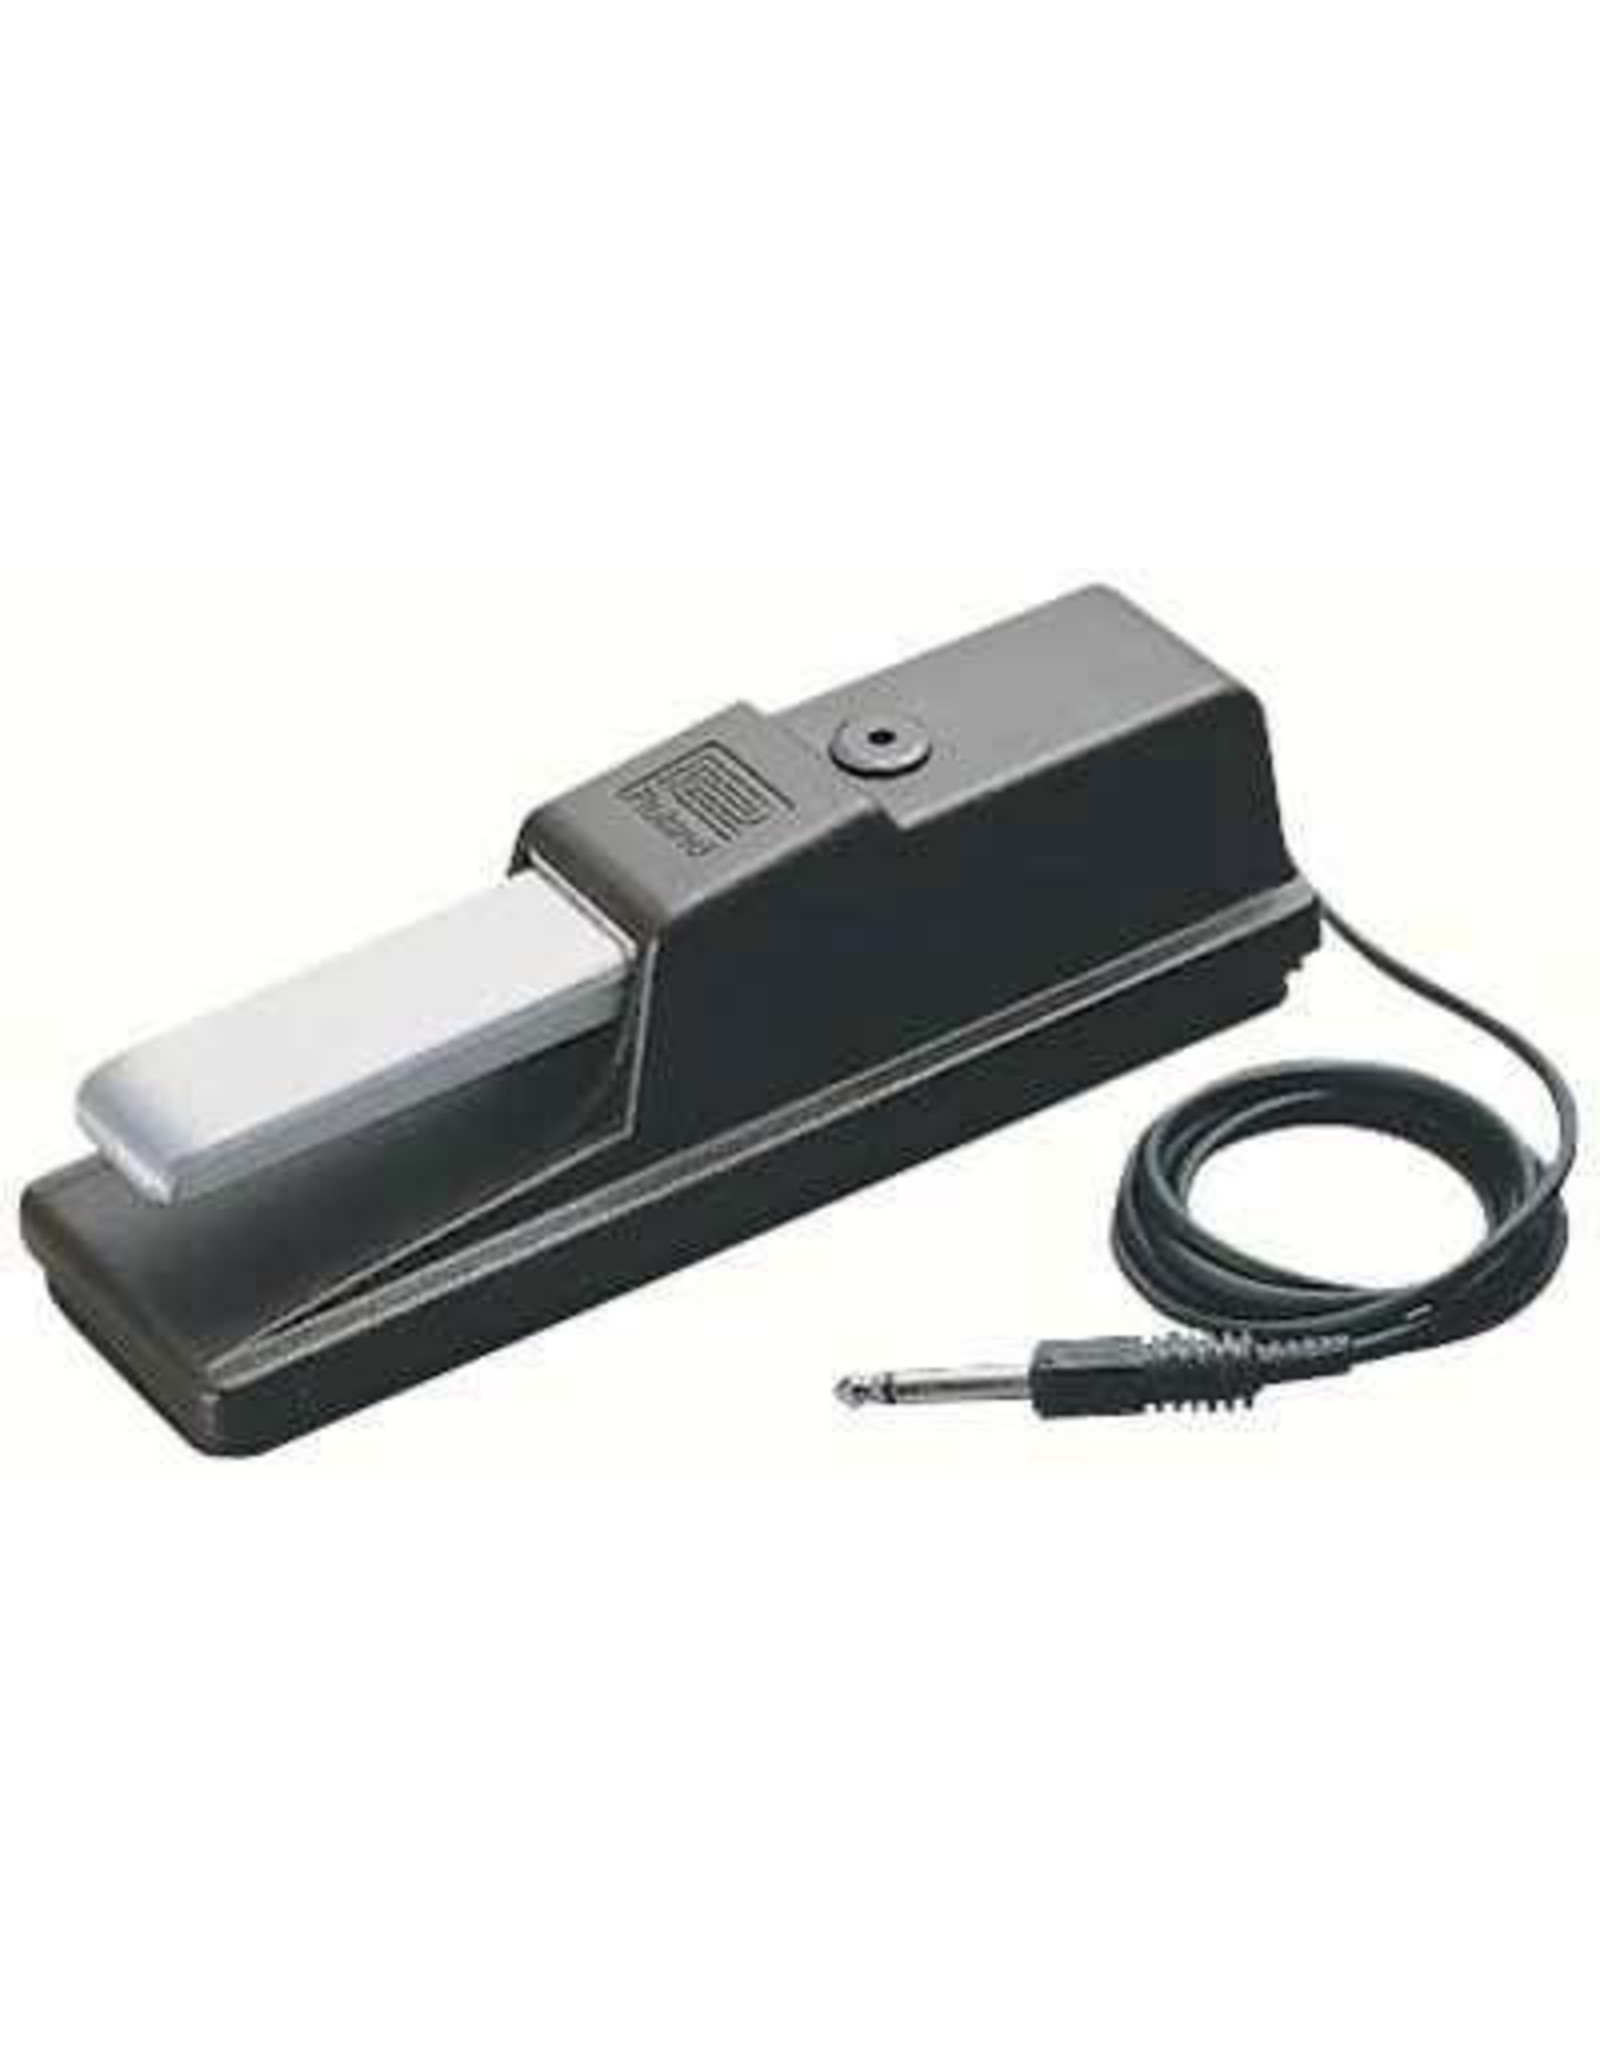 Roland  DP-8 Damper Sustain Pedal for E piano keyboard